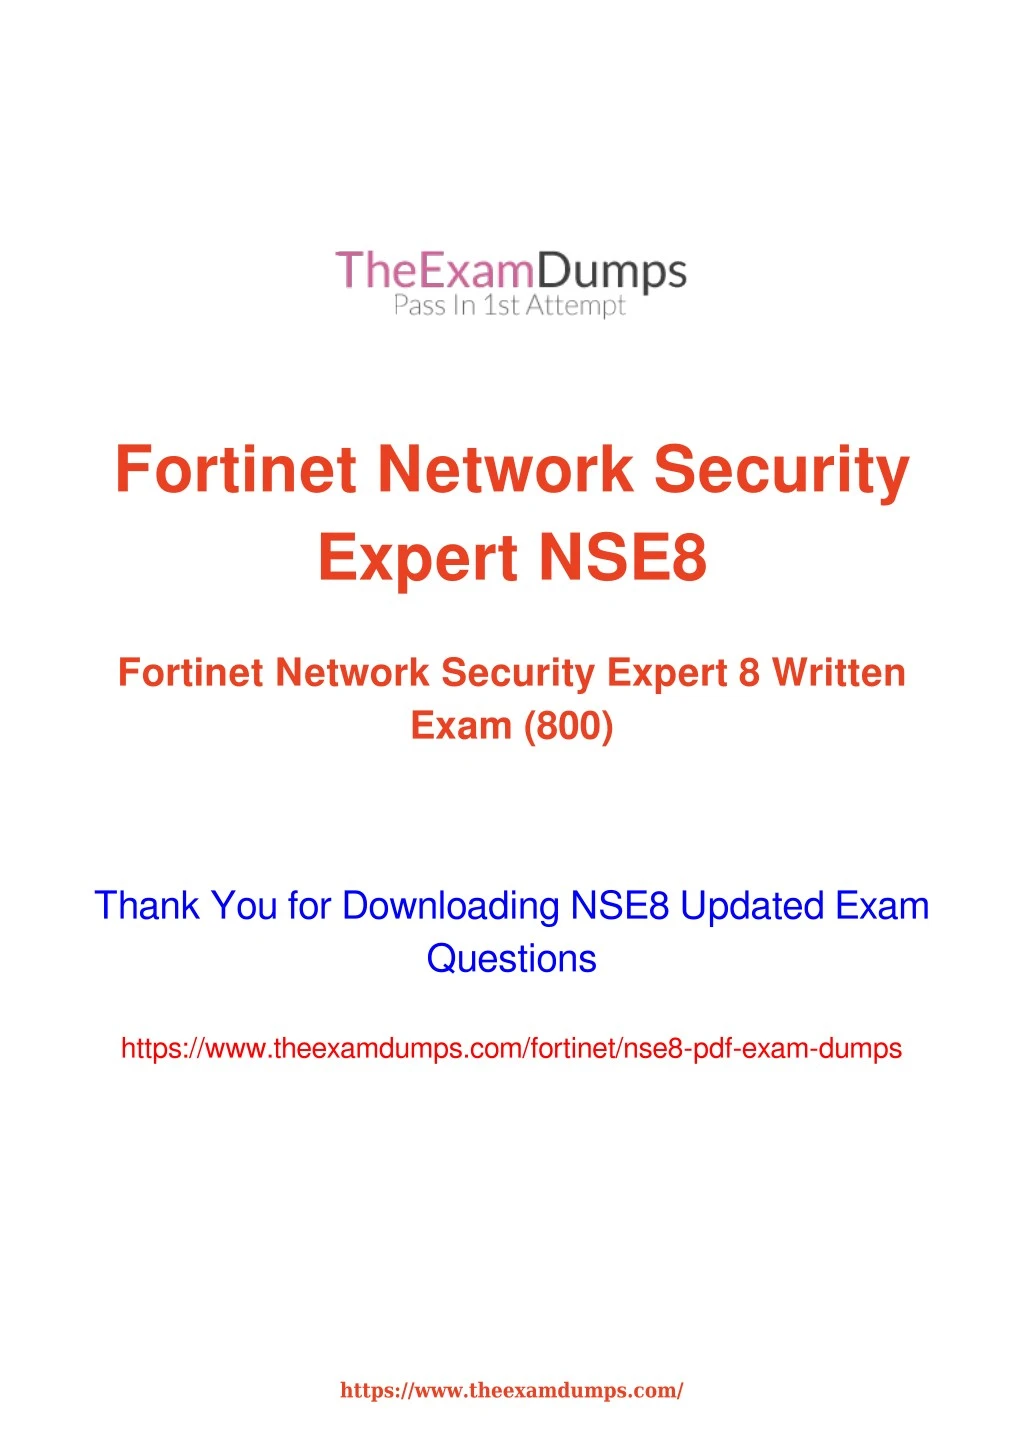 fortinet network security expert nse8